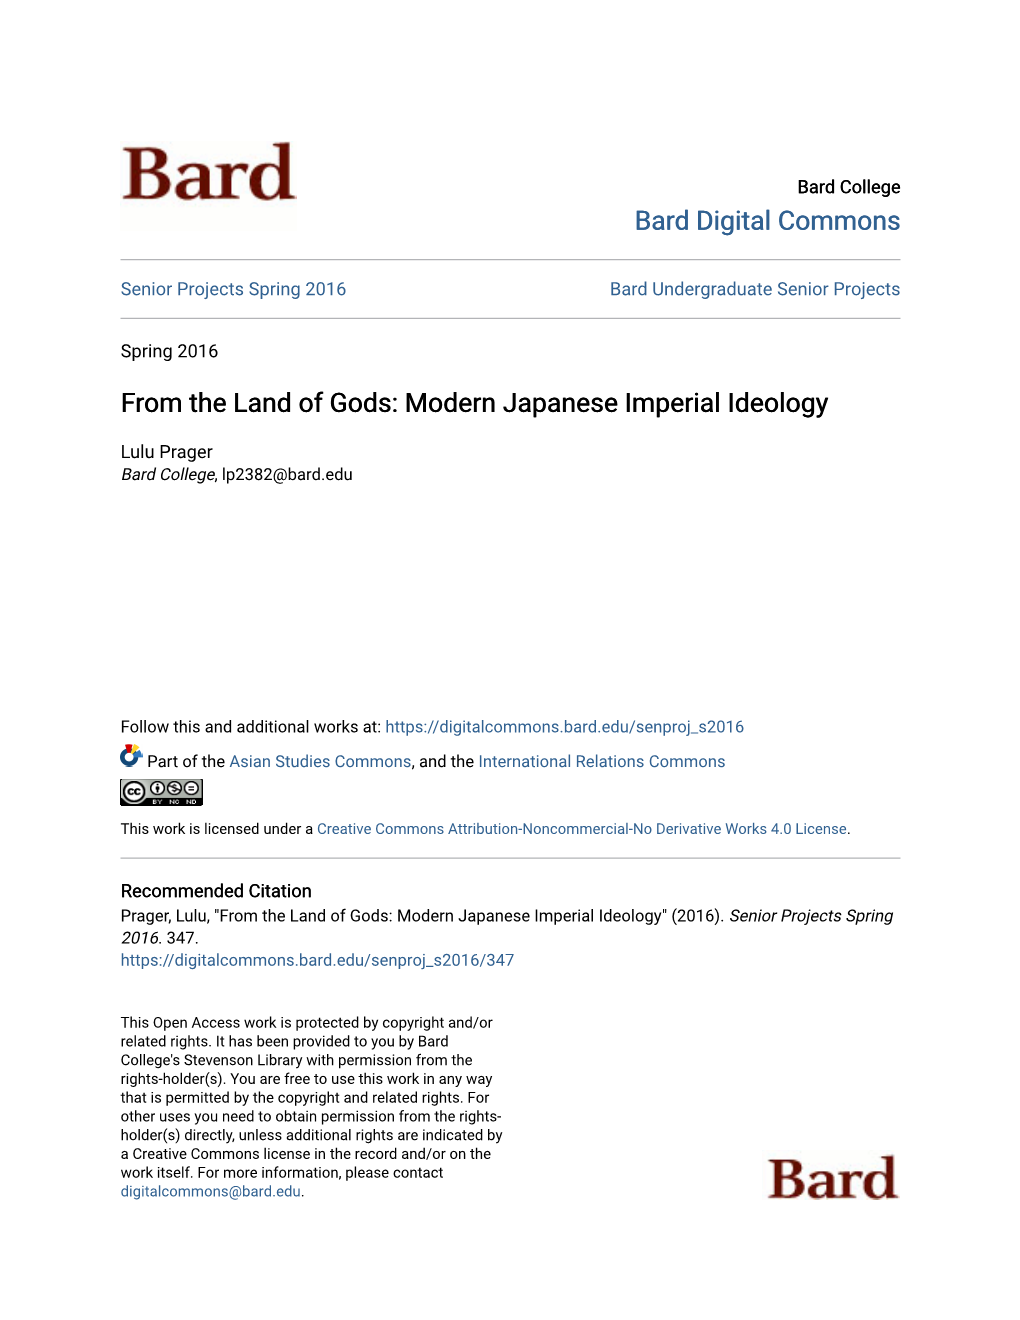 From the Land of Gods: Modern Japanese Imperial Ideology